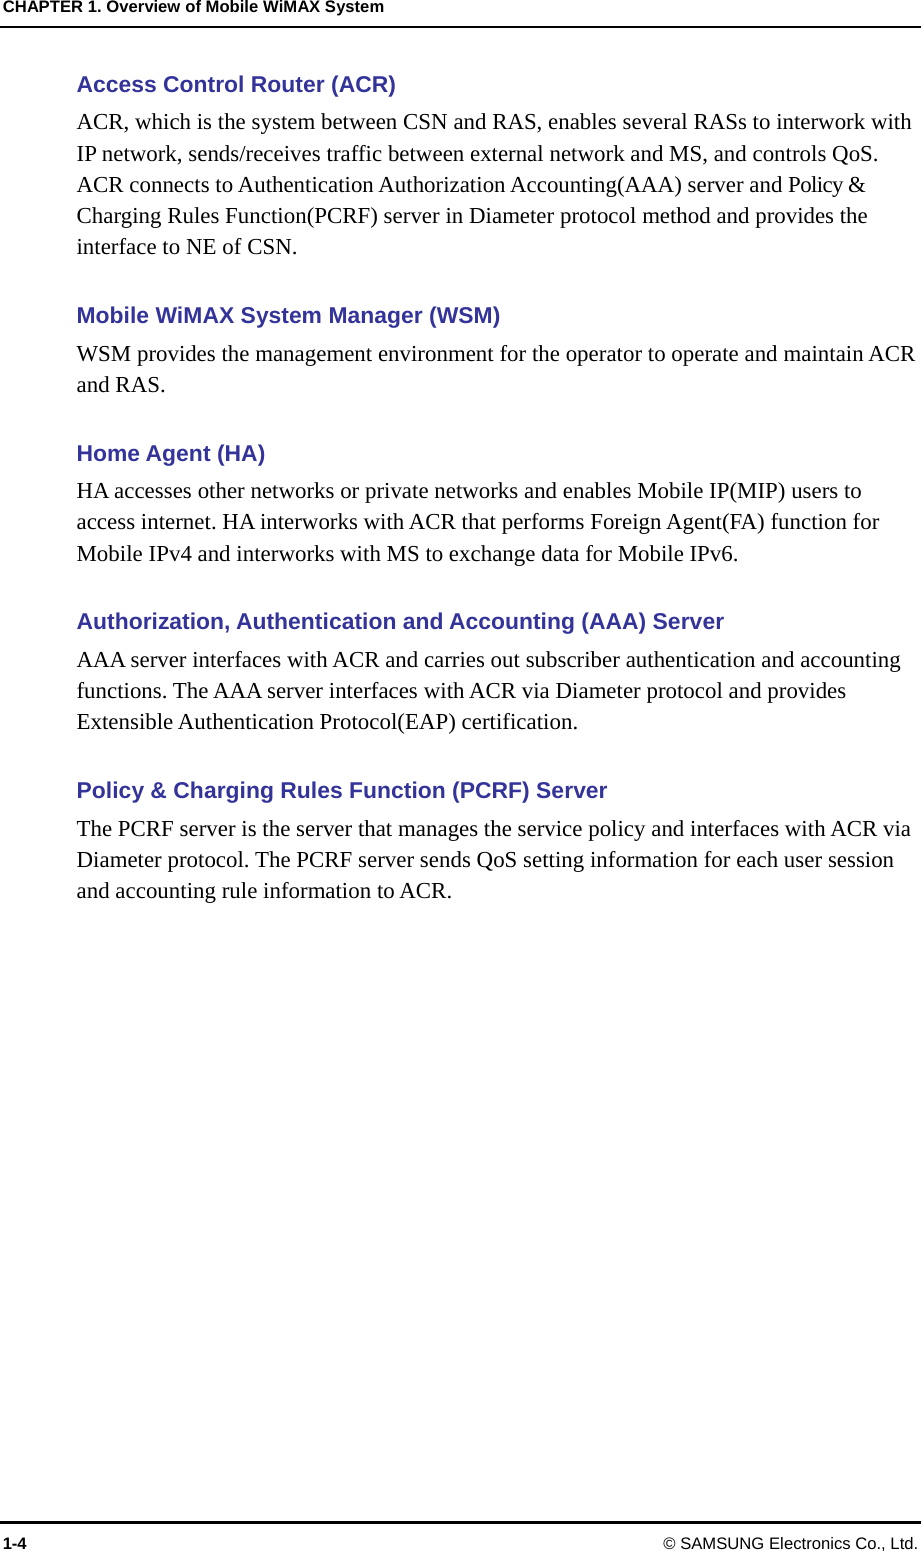 CHAPTER 1. Overview of Mobile WiMAX System 1-4 © SAMSUNG Electronics Co., Ltd. Access Control Router (ACR) ACR, which is the system between CSN and RAS, enables several RASs to interwork with IP network, sends/receives traffic between external network and MS, and controls QoS.   ACR connects to Authentication Authorization Accounting(AAA) server and Policy &amp; Charging Rules Function(PCRF) server in Diameter protocol method and provides the interface to NE of CSN.    Mobile WiMAX System Manager (WSM) WSM provides the management environment for the operator to operate and maintain ACR and RAS.  Home Agent (HA) HA accesses other networks or private networks and enables Mobile IP(MIP) users to access internet. HA interworks with ACR that performs Foreign Agent(FA) function for Mobile IPv4 and interworks with MS to exchange data for Mobile IPv6.  Authorization, Authentication and Accounting (AAA) Server   AAA server interfaces with ACR and carries out subscriber authentication and accounting functions. The AAA server interfaces with ACR via Diameter protocol and provides Extensible Authentication Protocol(EAP) certification.  Policy &amp; Charging Rules Function (PCRF) Server   The PCRF server is the server that manages the service policy and interfaces with ACR via Diameter protocol. The PCRF server sends QoS setting information for each user session and accounting rule information to ACR.  